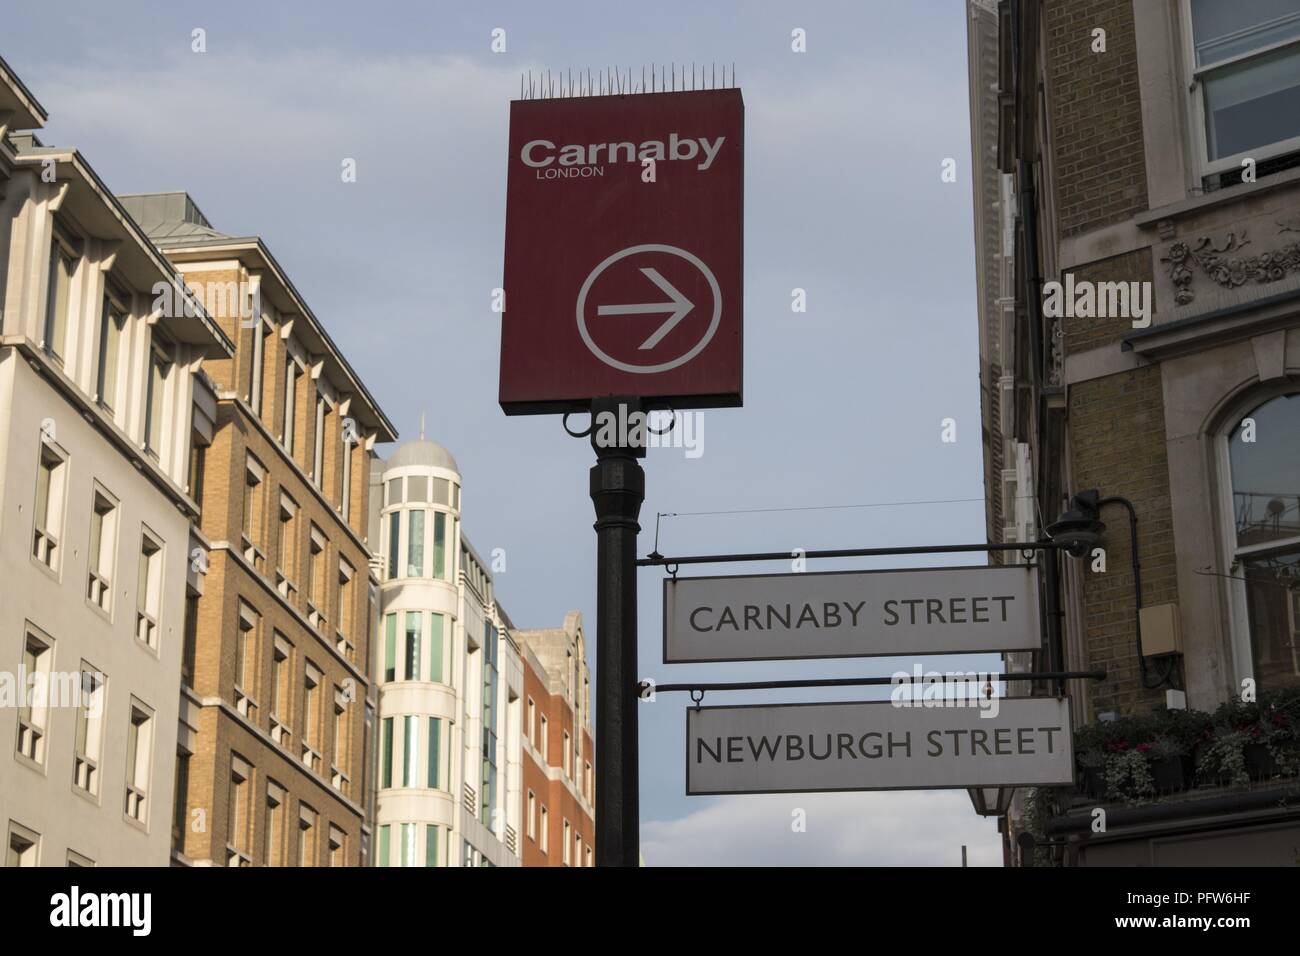 Street Sign between buildings, showing Carnaby Street and Newburgh Street, London, England, October 28, 2017. () Stock Photo